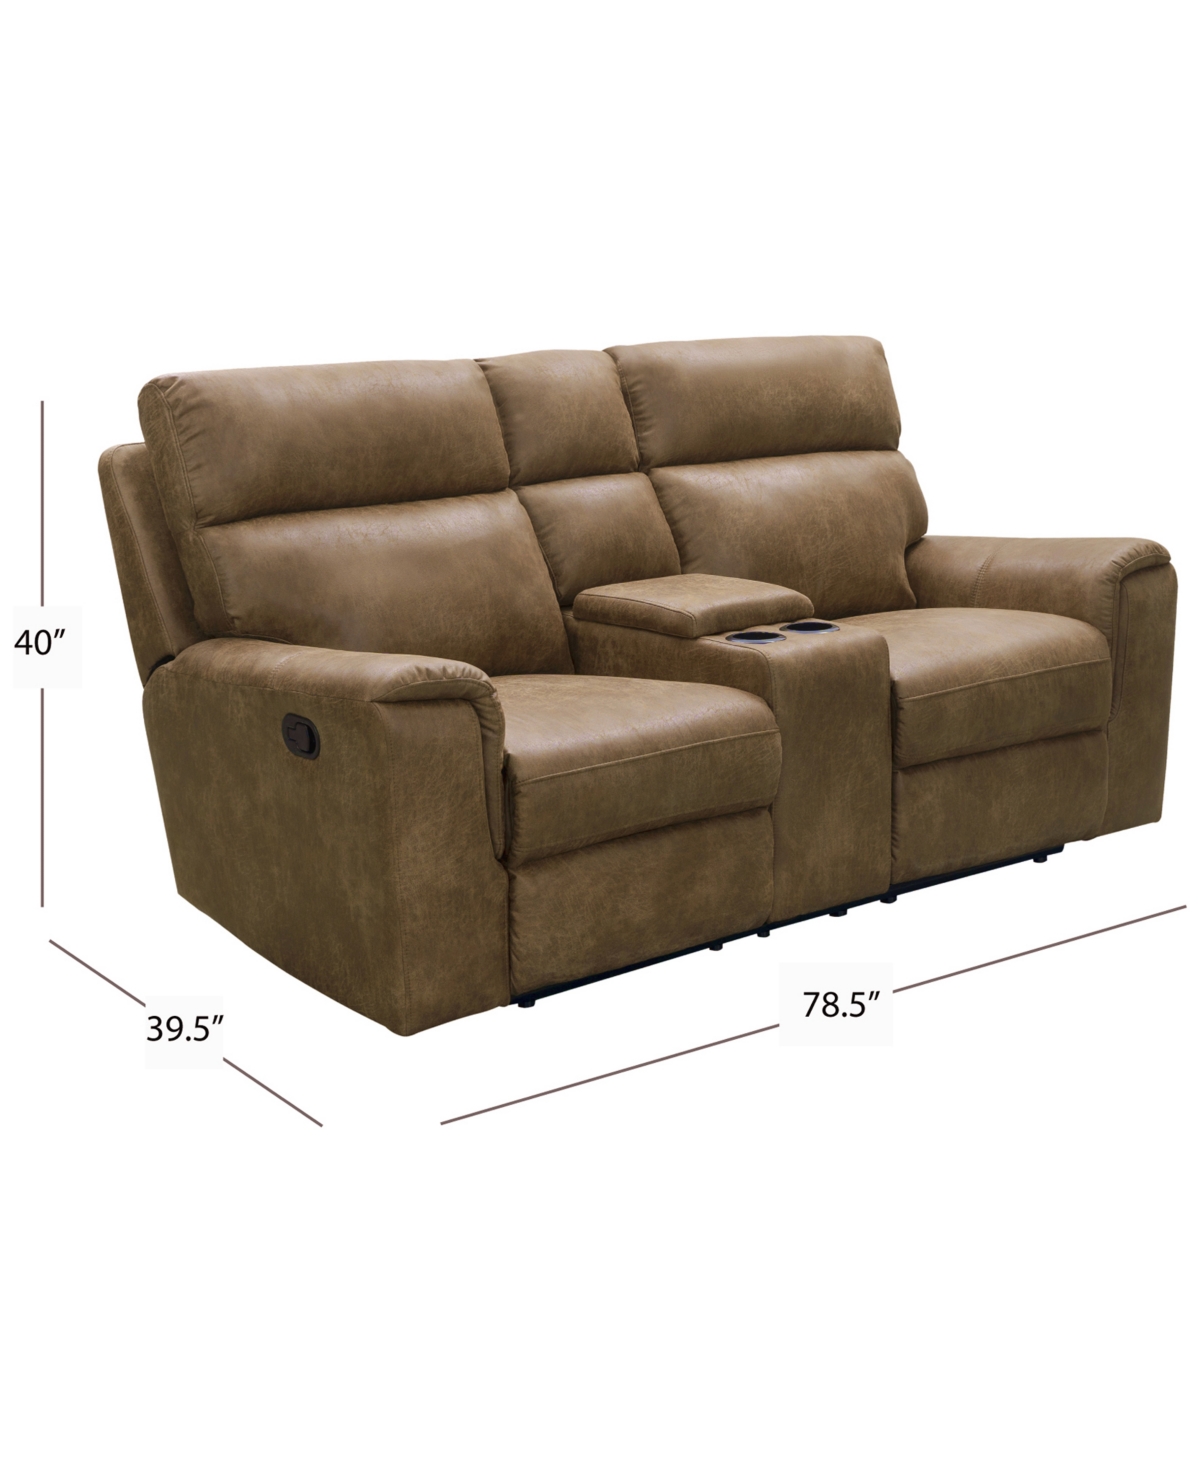 Shop Abbyson Living Lawrence 39.5" Fabric Reclining Console Loveseat In Camel